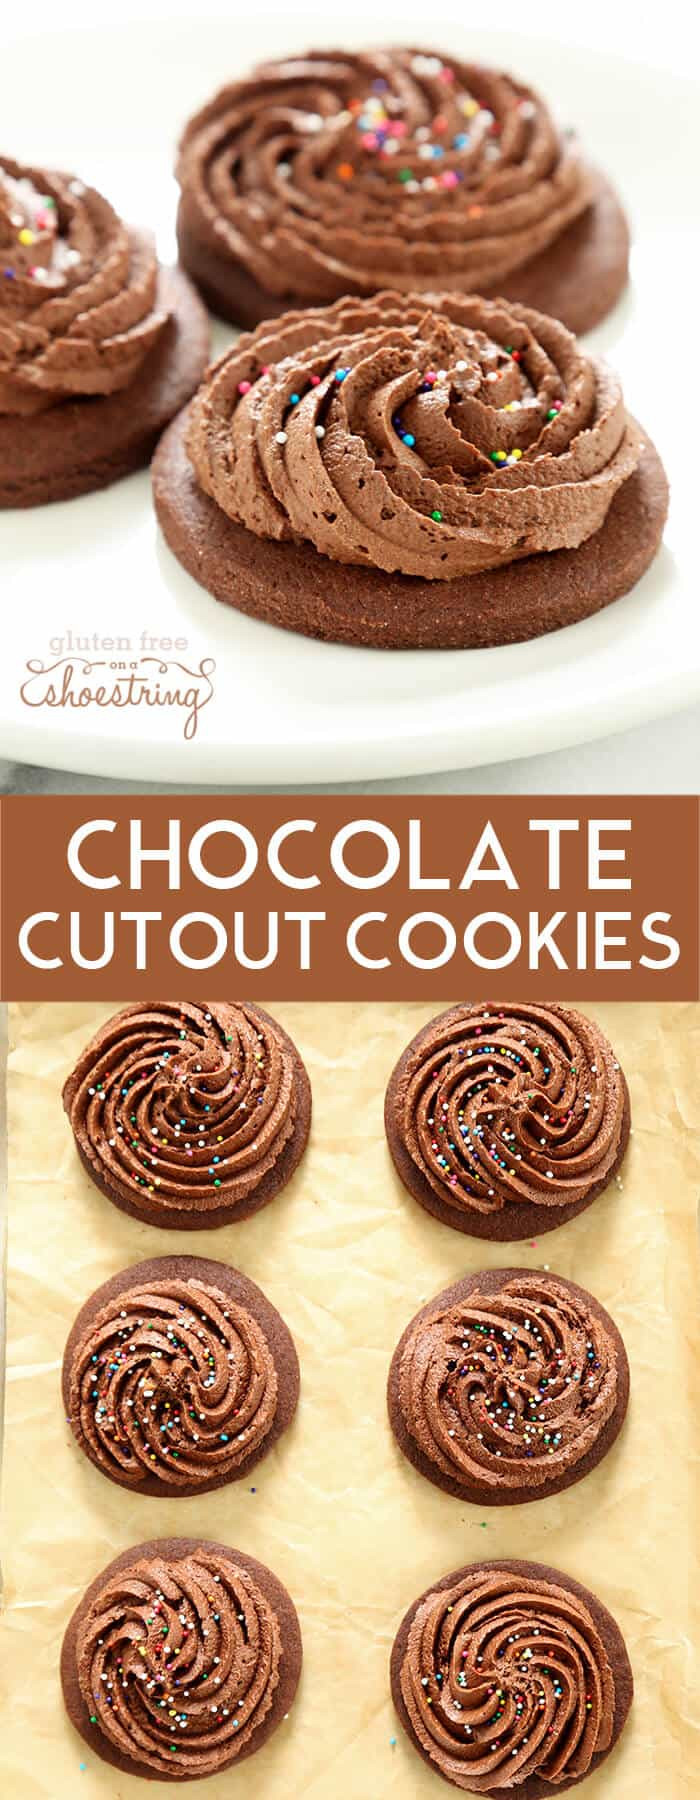 Gluten Free Christmas Cut Out Cookies
 Gluten Free Chocolate Cut out Sugar Cookies